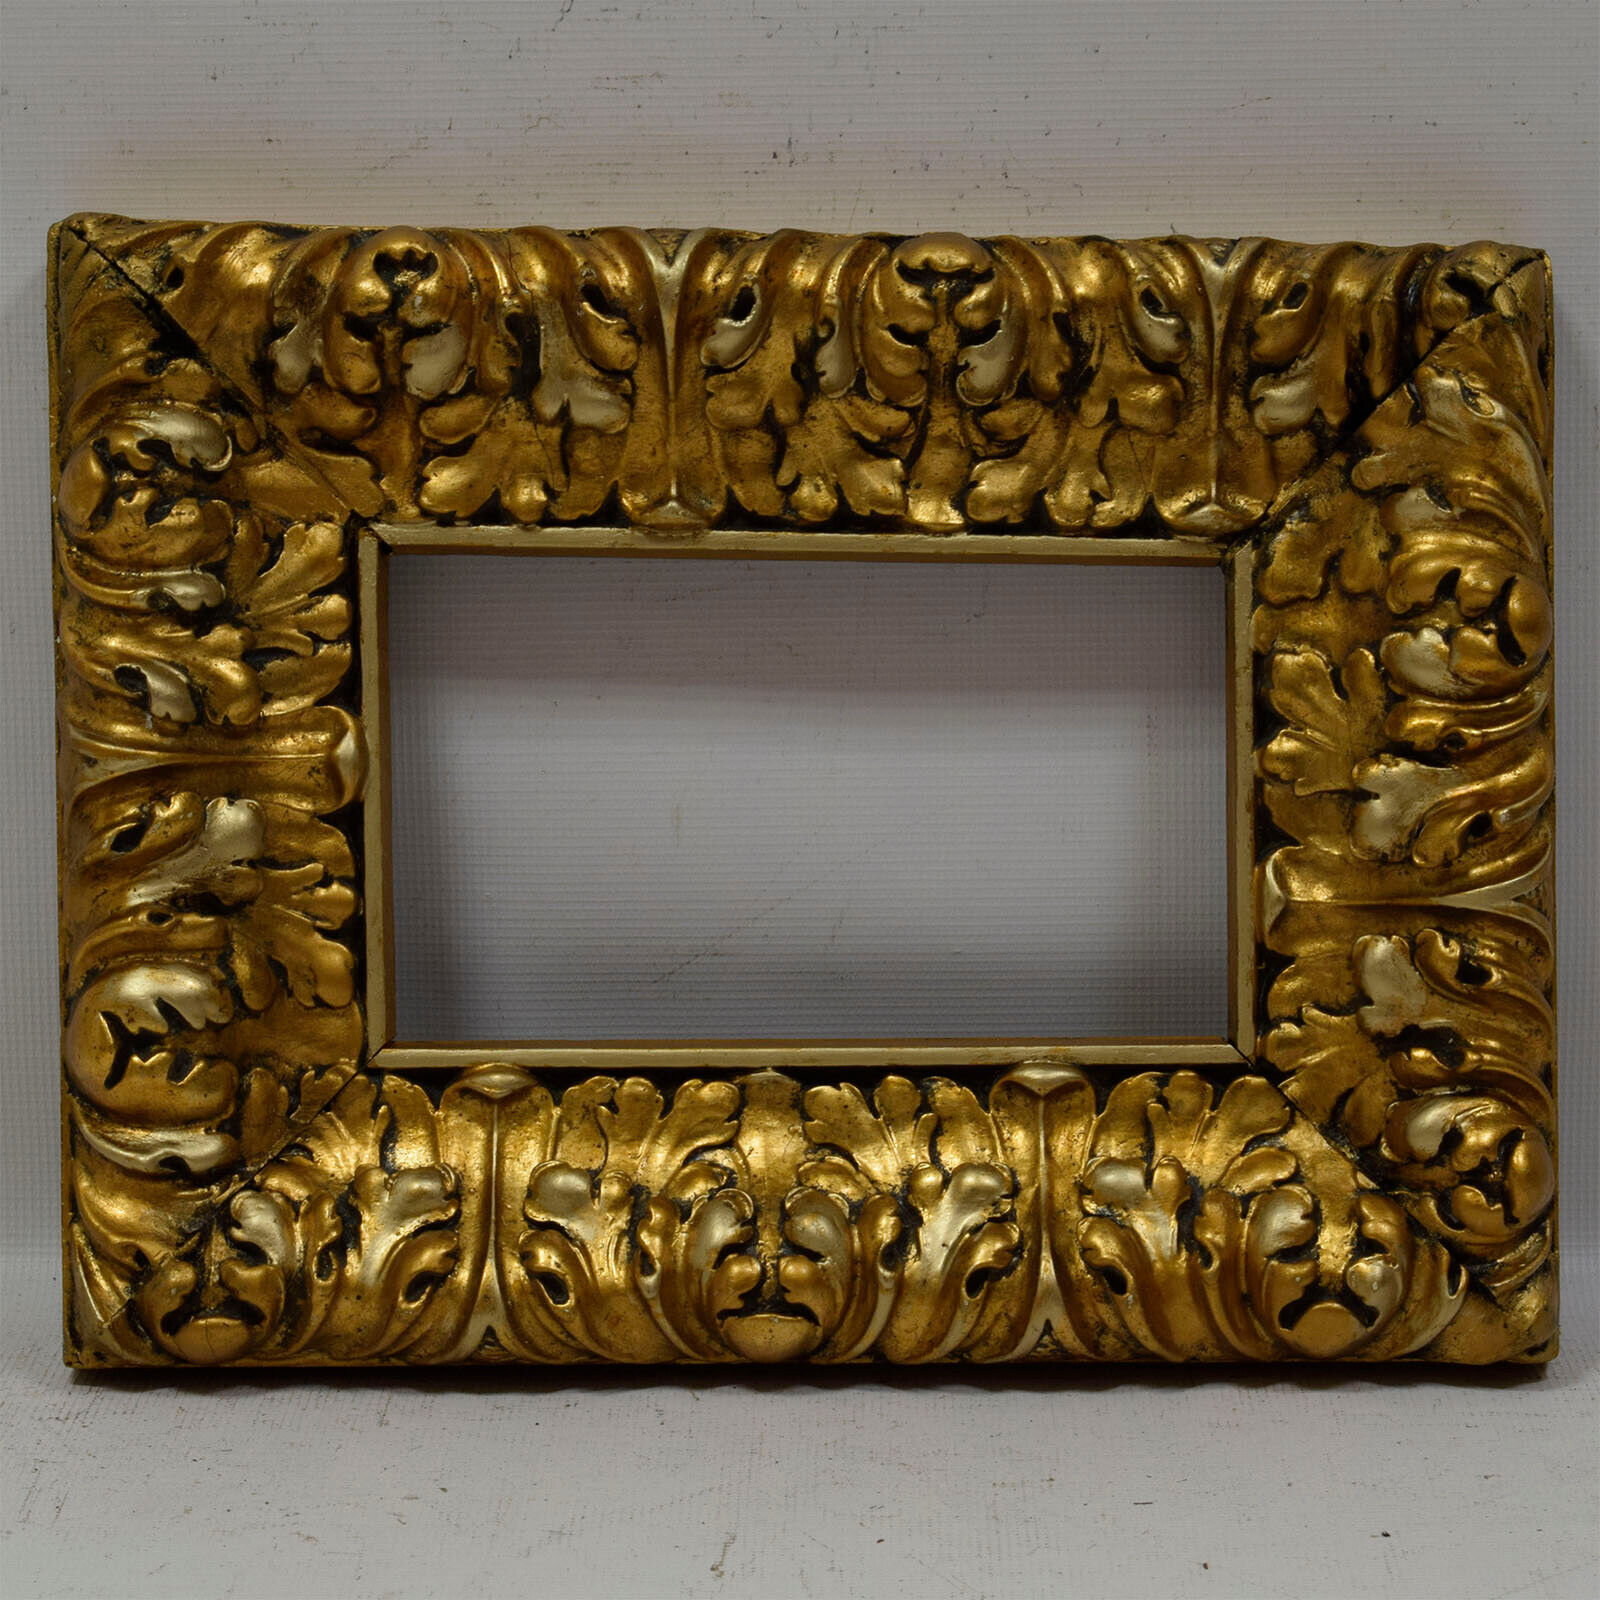 Ca. 1900 Old wooden frame in original condition Internal: 11.6x7 in